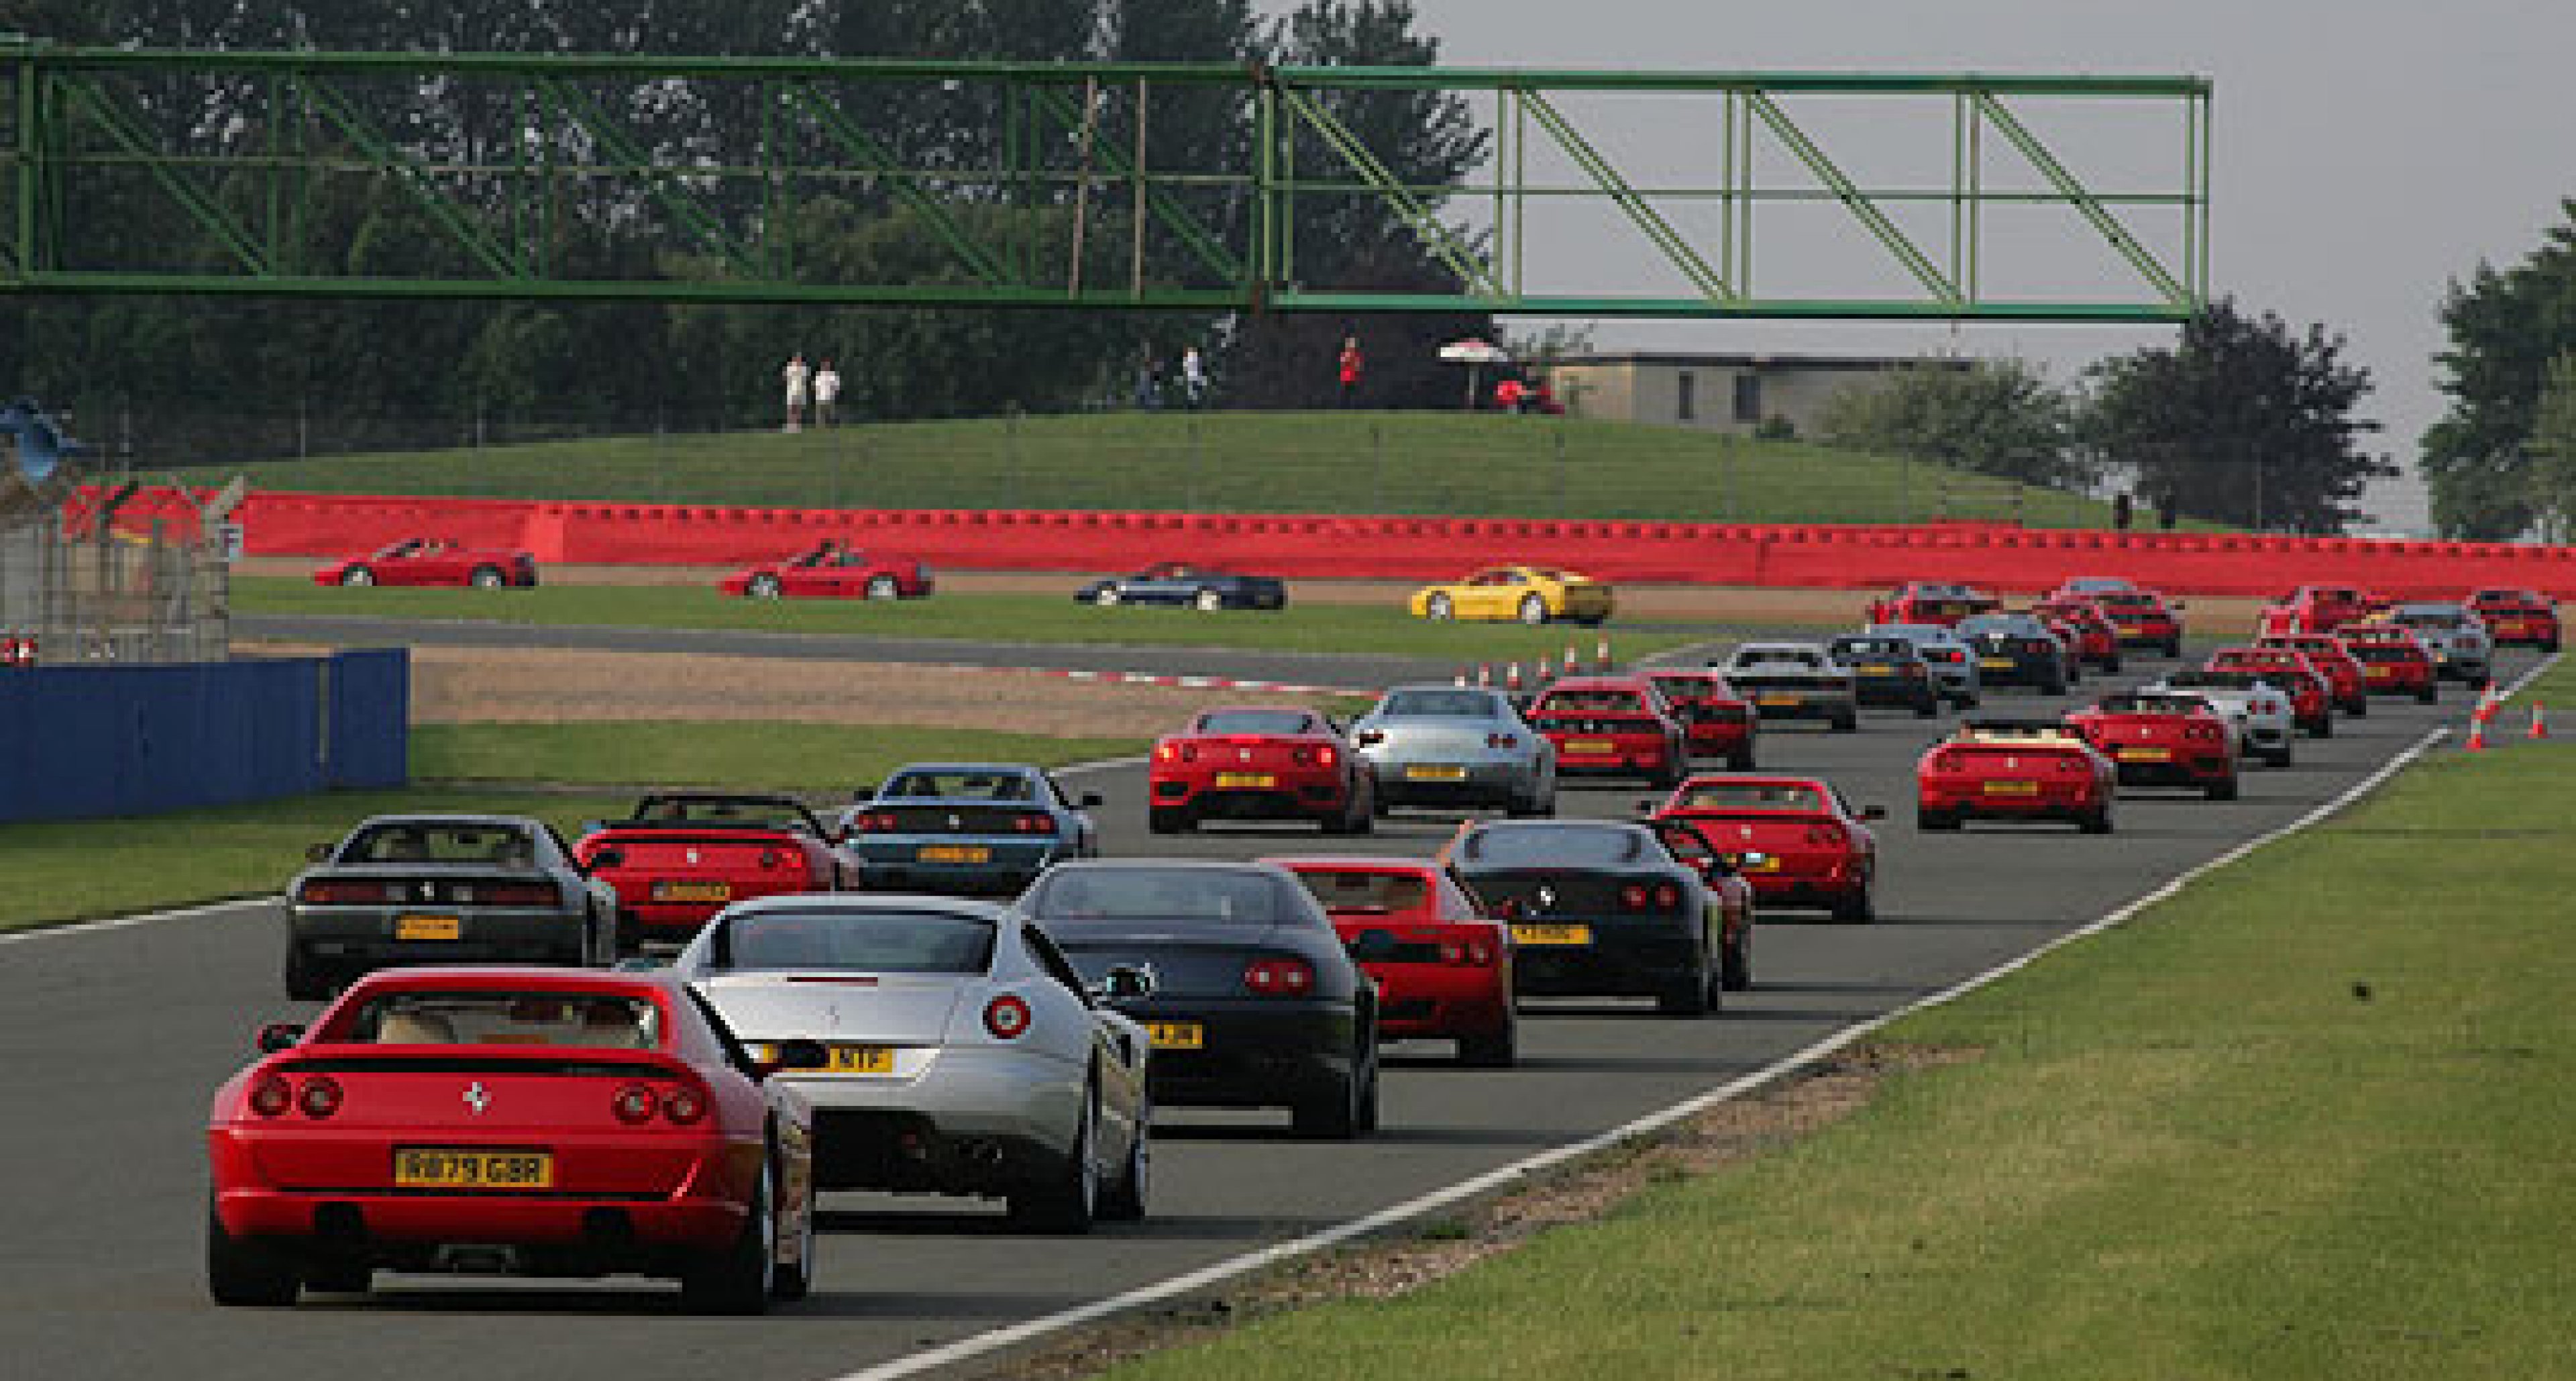 Guinness World Record for  ‘Largest Parade of Ferrari Cars’